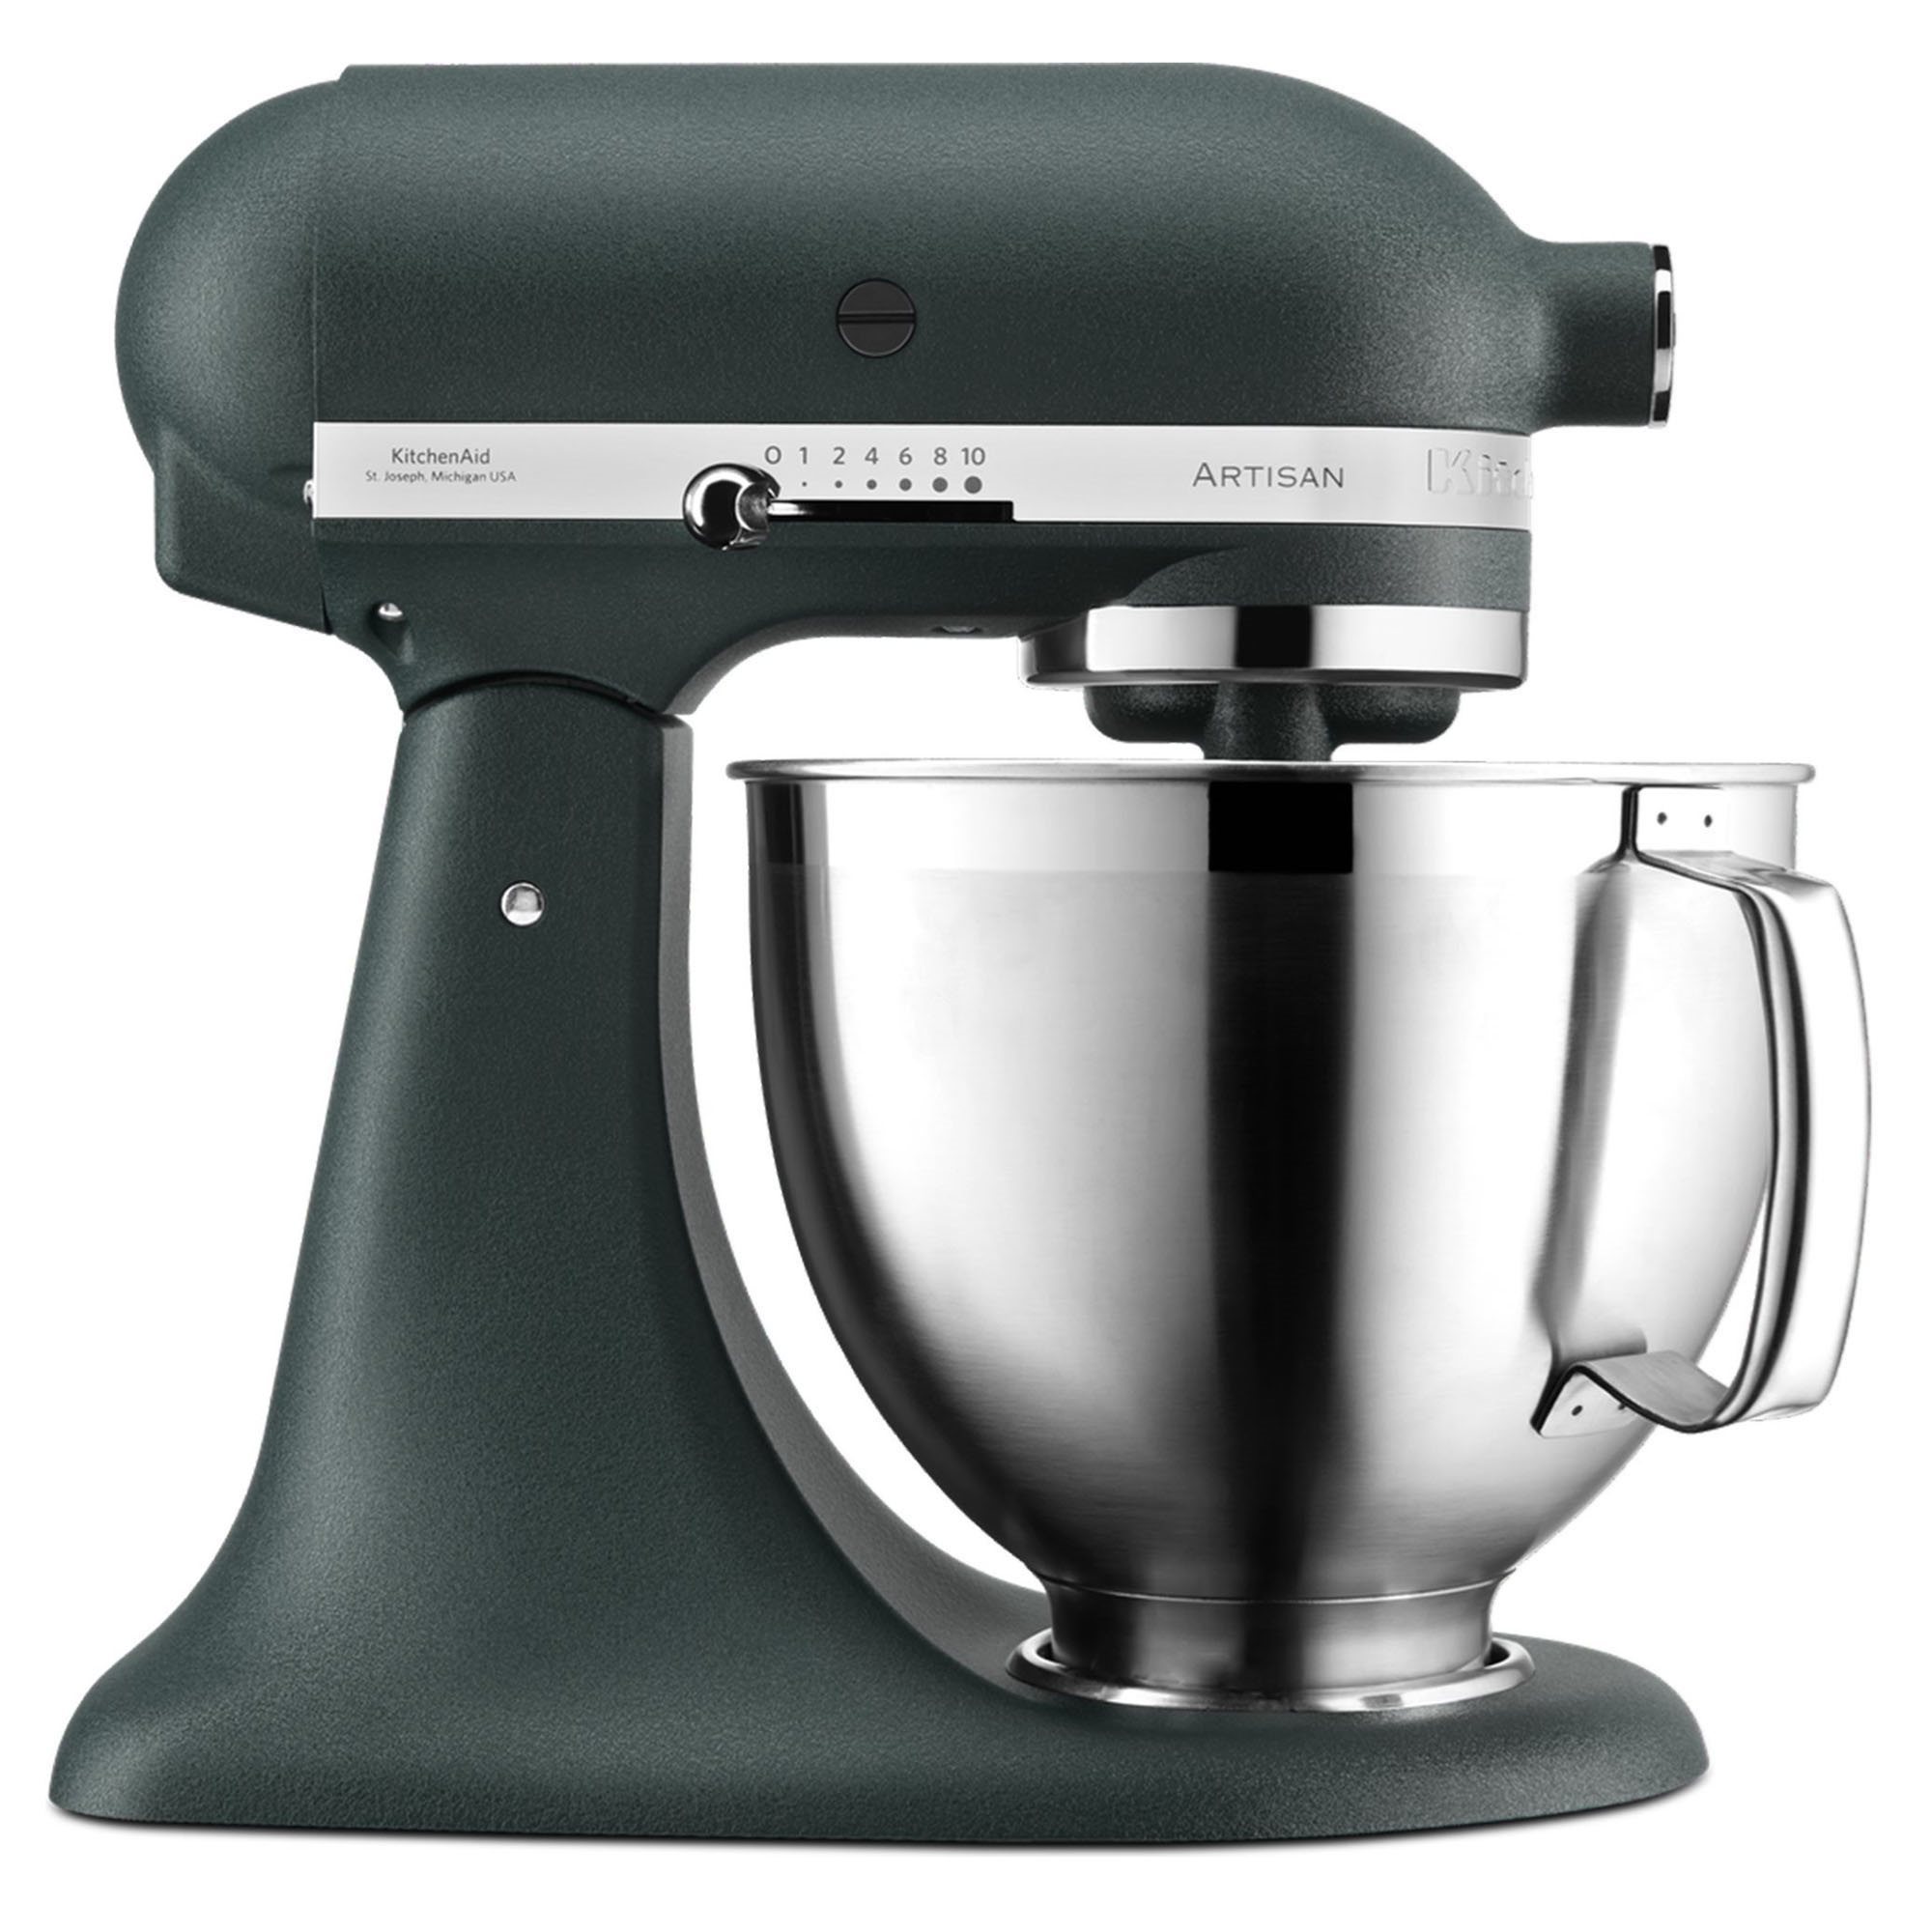 Pastry paddle, suitable for 4.3 L and 4.8 L bowls, stainless steel -  KitchenAid brand